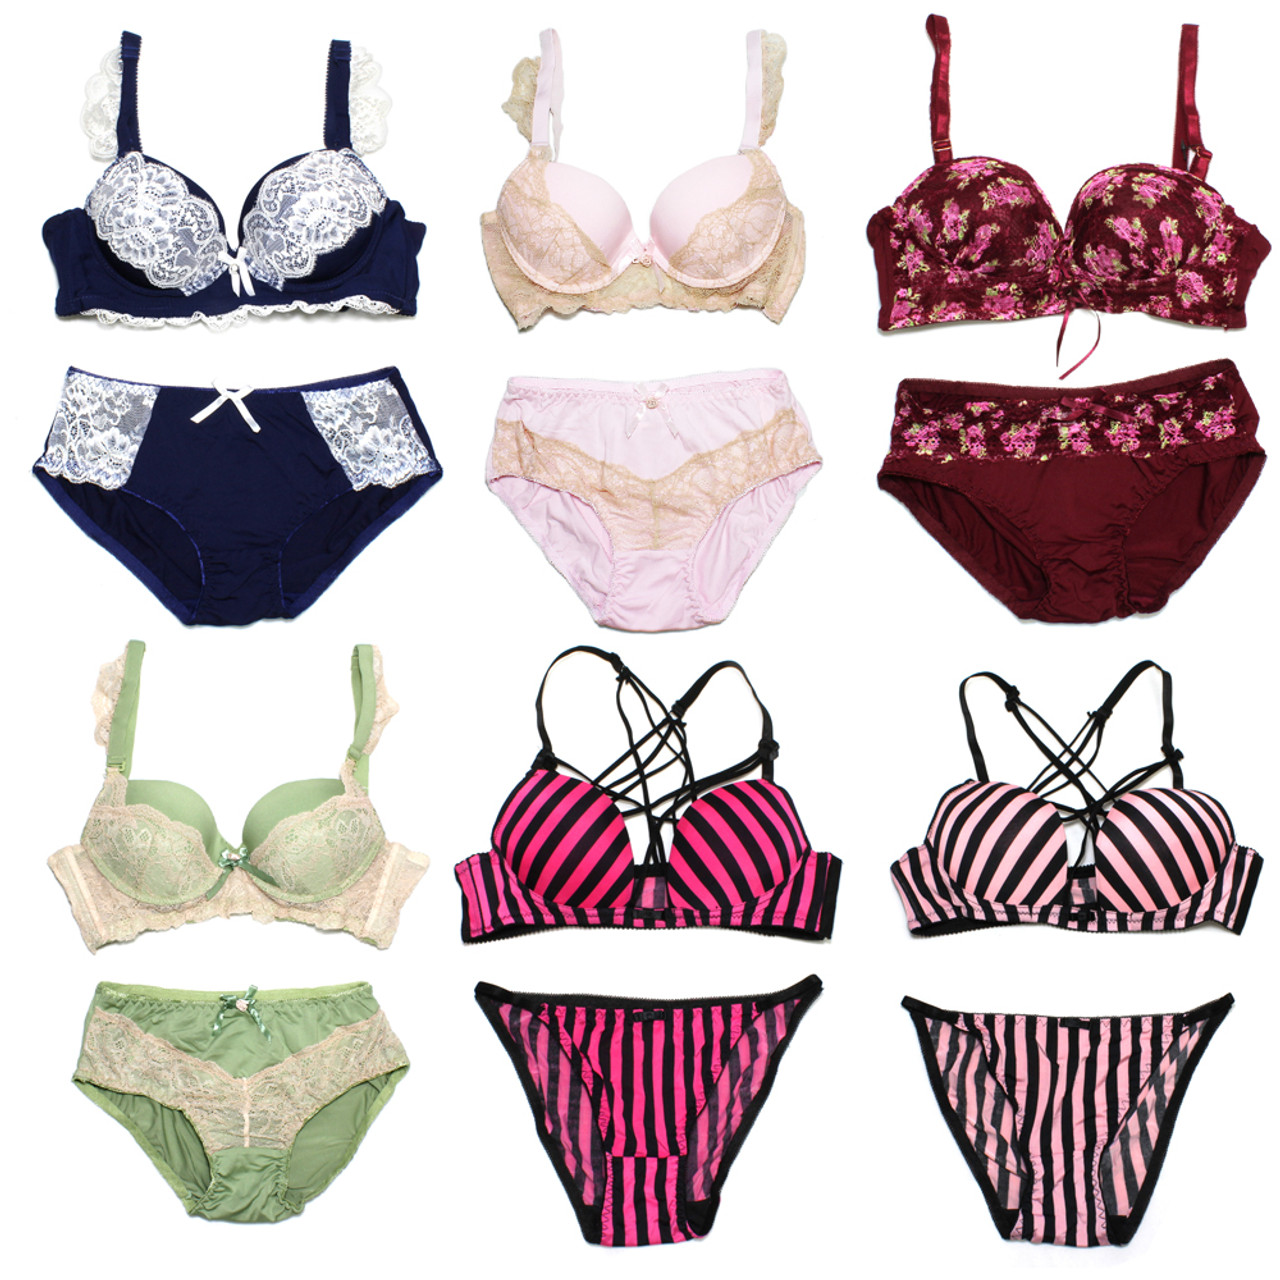 Wholesale bras price For Supportive Underwear 